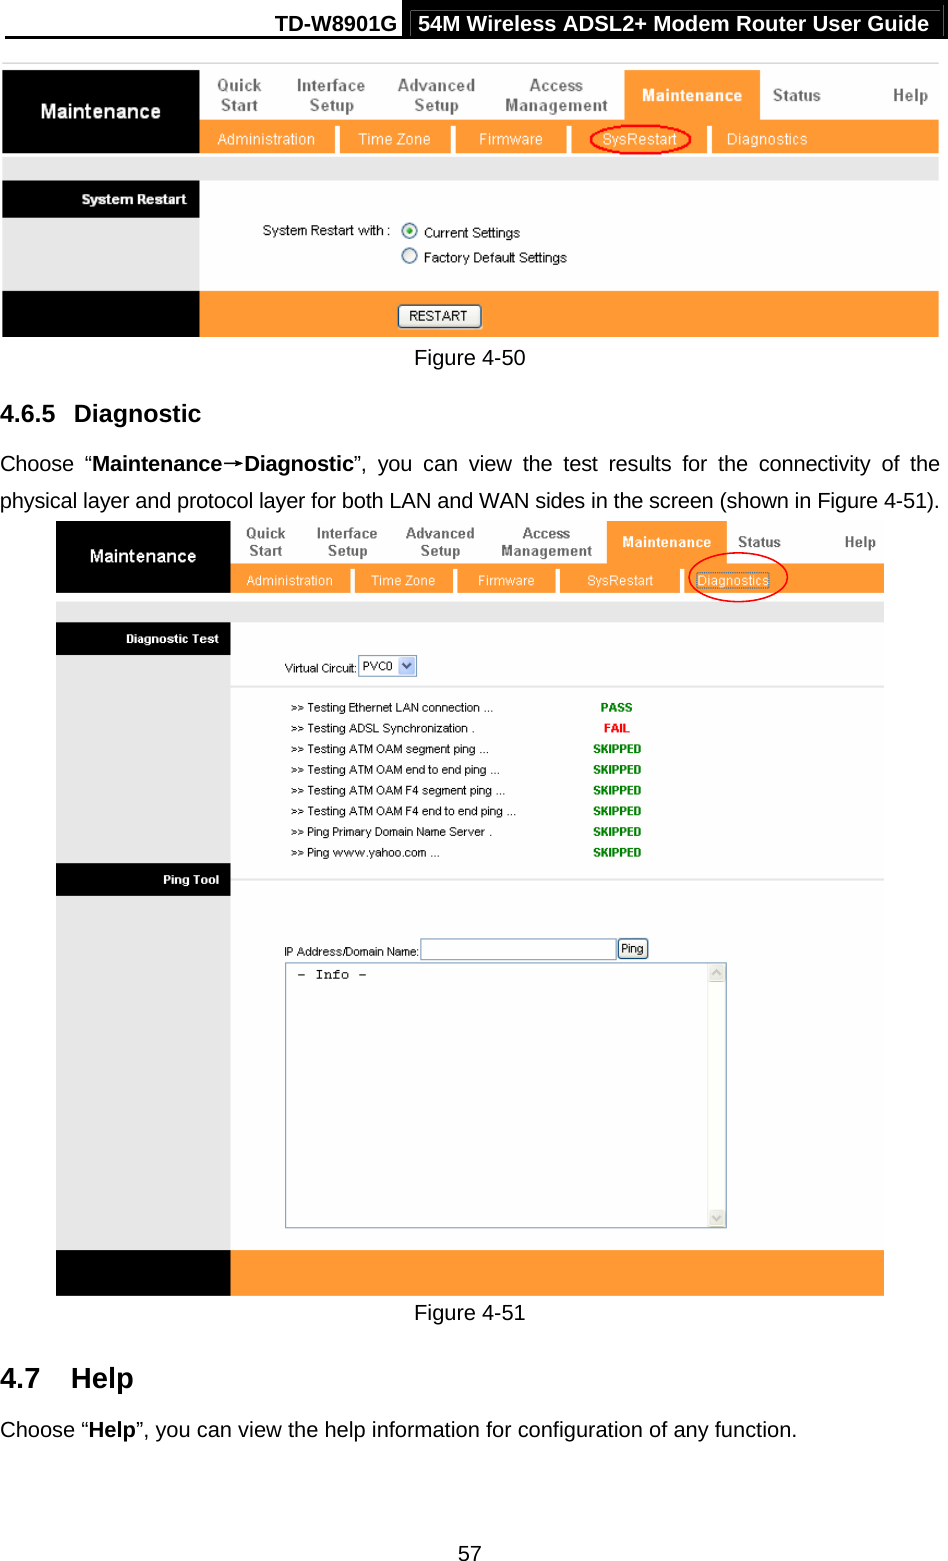 TD-W8901G 54M Wireless ADSL2+ Modem Router User Guide  57 Figure 4-50 4.6.5  Diagnostic Choose “Maintenance→Diagnostic”, you can view the test results for the connectivity of the physical layer and protocol layer for both LAN and WAN sides in the screen (shown in Figure 4-51).  Figure 4-51 4.7  Help Choose “Help”, you can view the help information for configuration of any function. 